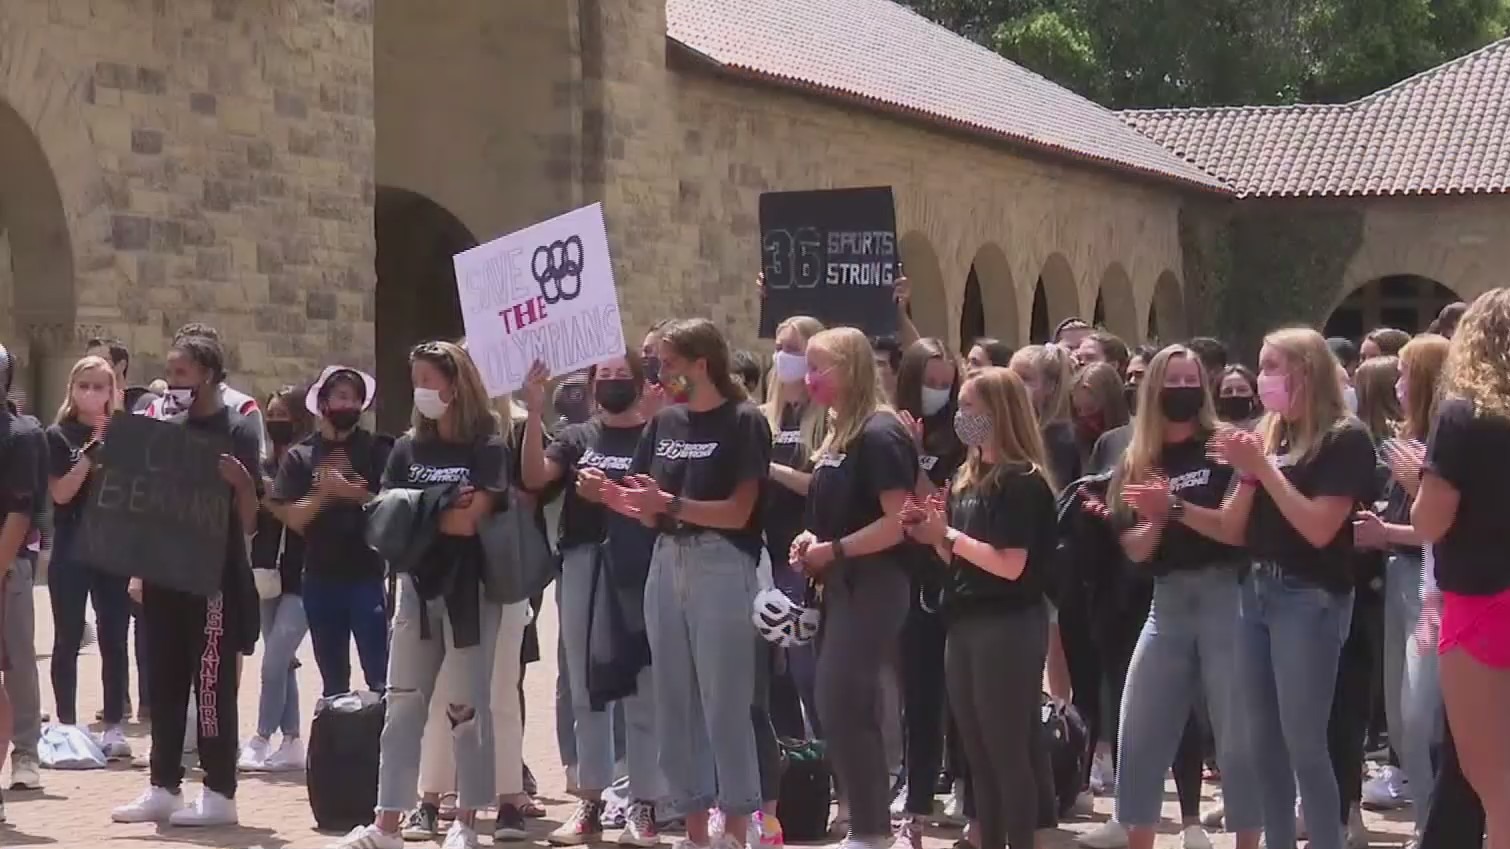 Supporters of recently cut Stanford athletic programs gather outside the university president's office on April 26, 2021. (CBS)